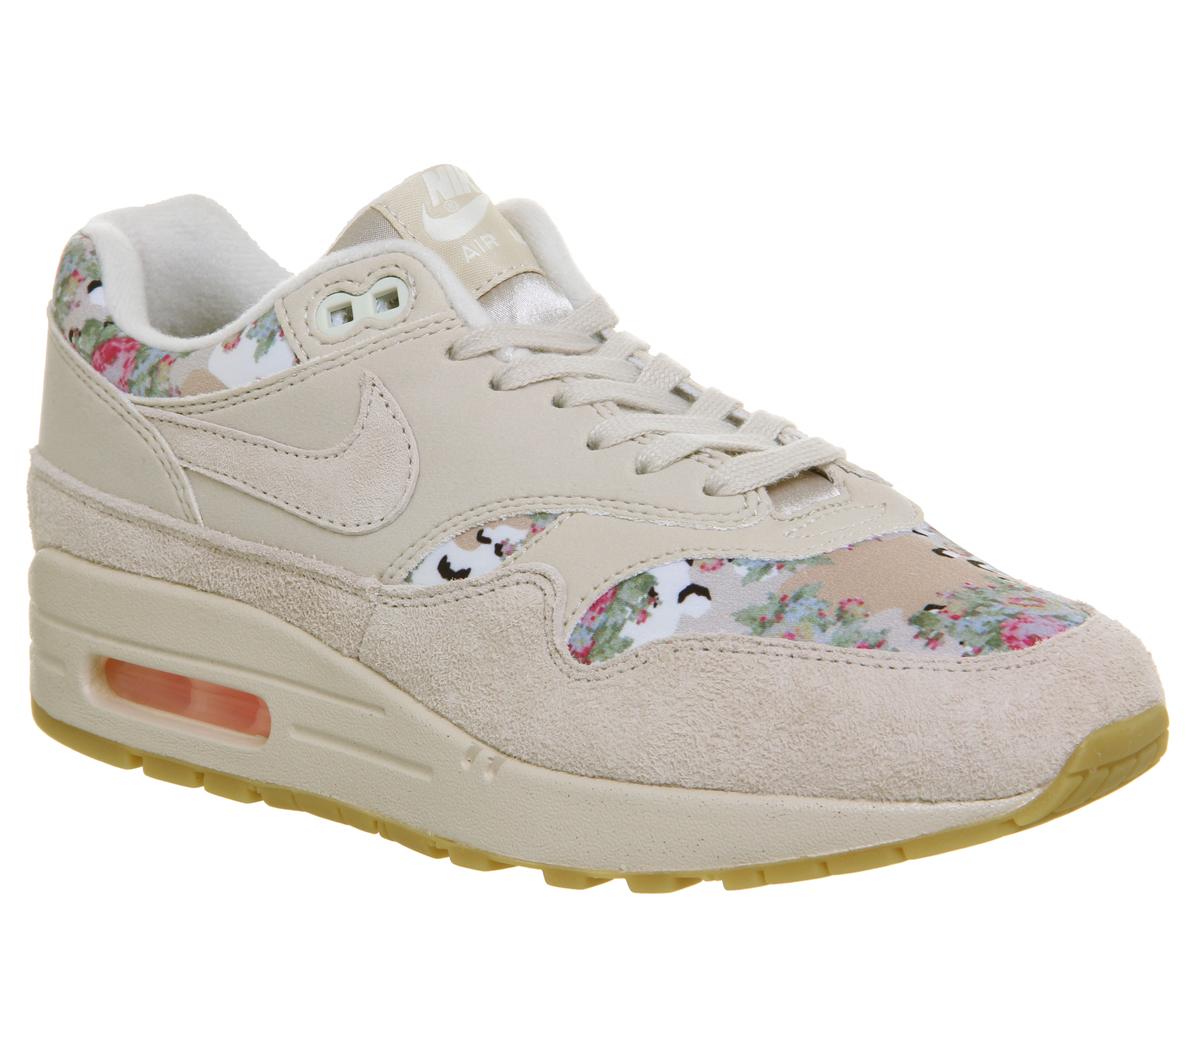 Nike Air Max 1 Trainers Camo Floral F 